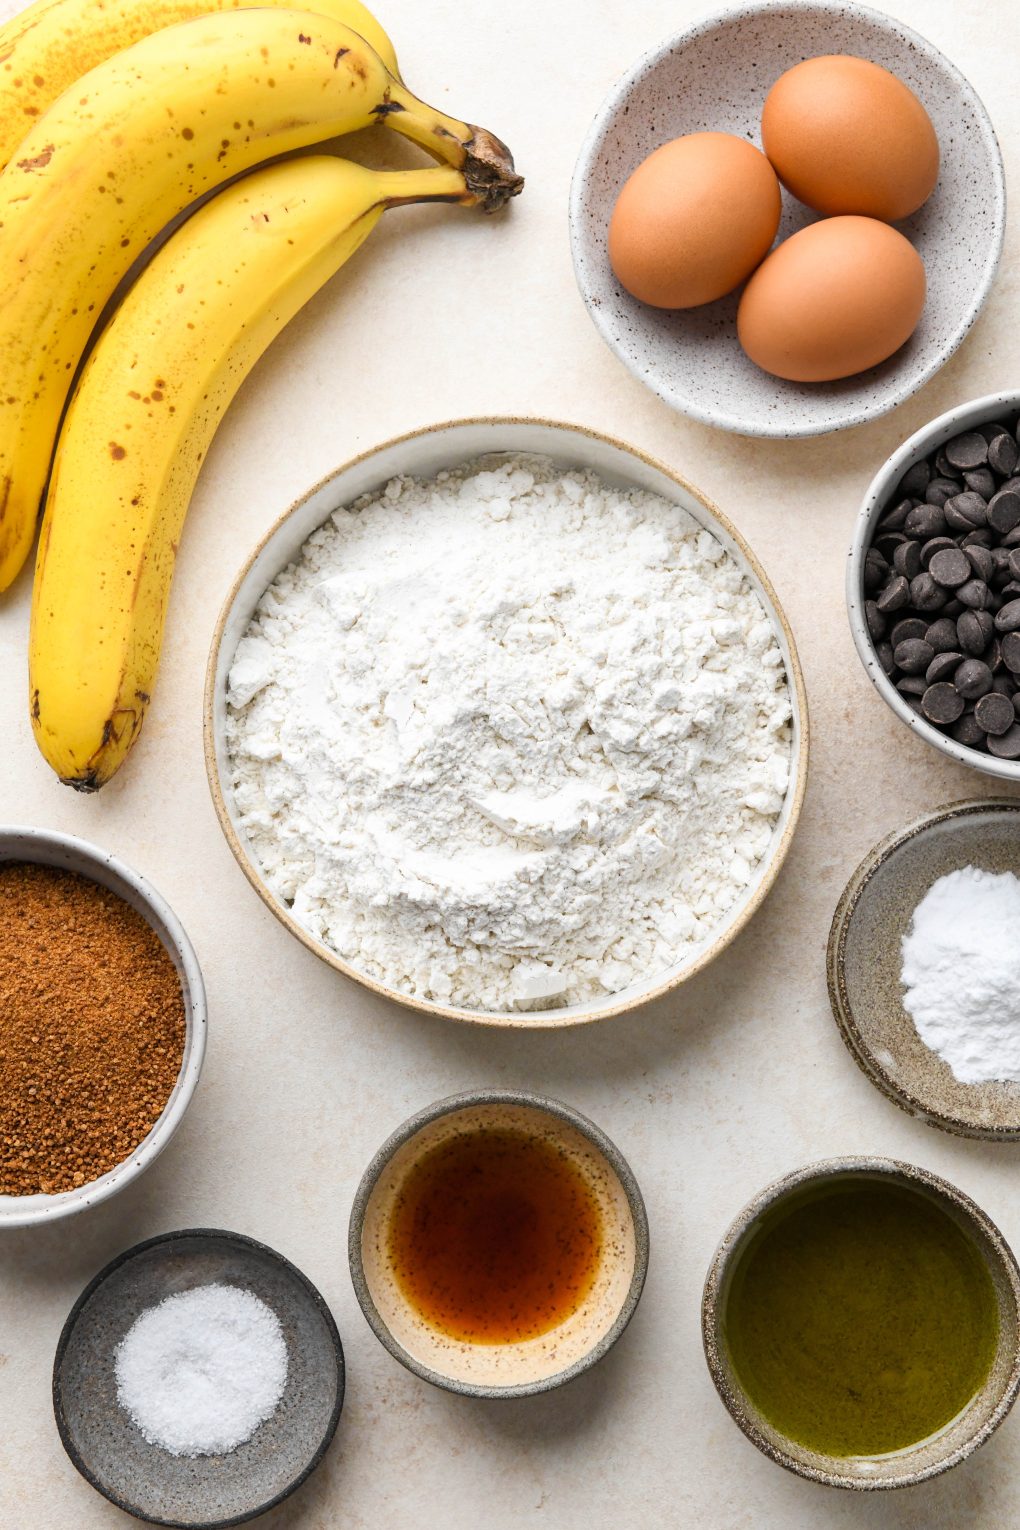 Ingredients for easy gluten free banana bread in various bowls on a cream colored surface.